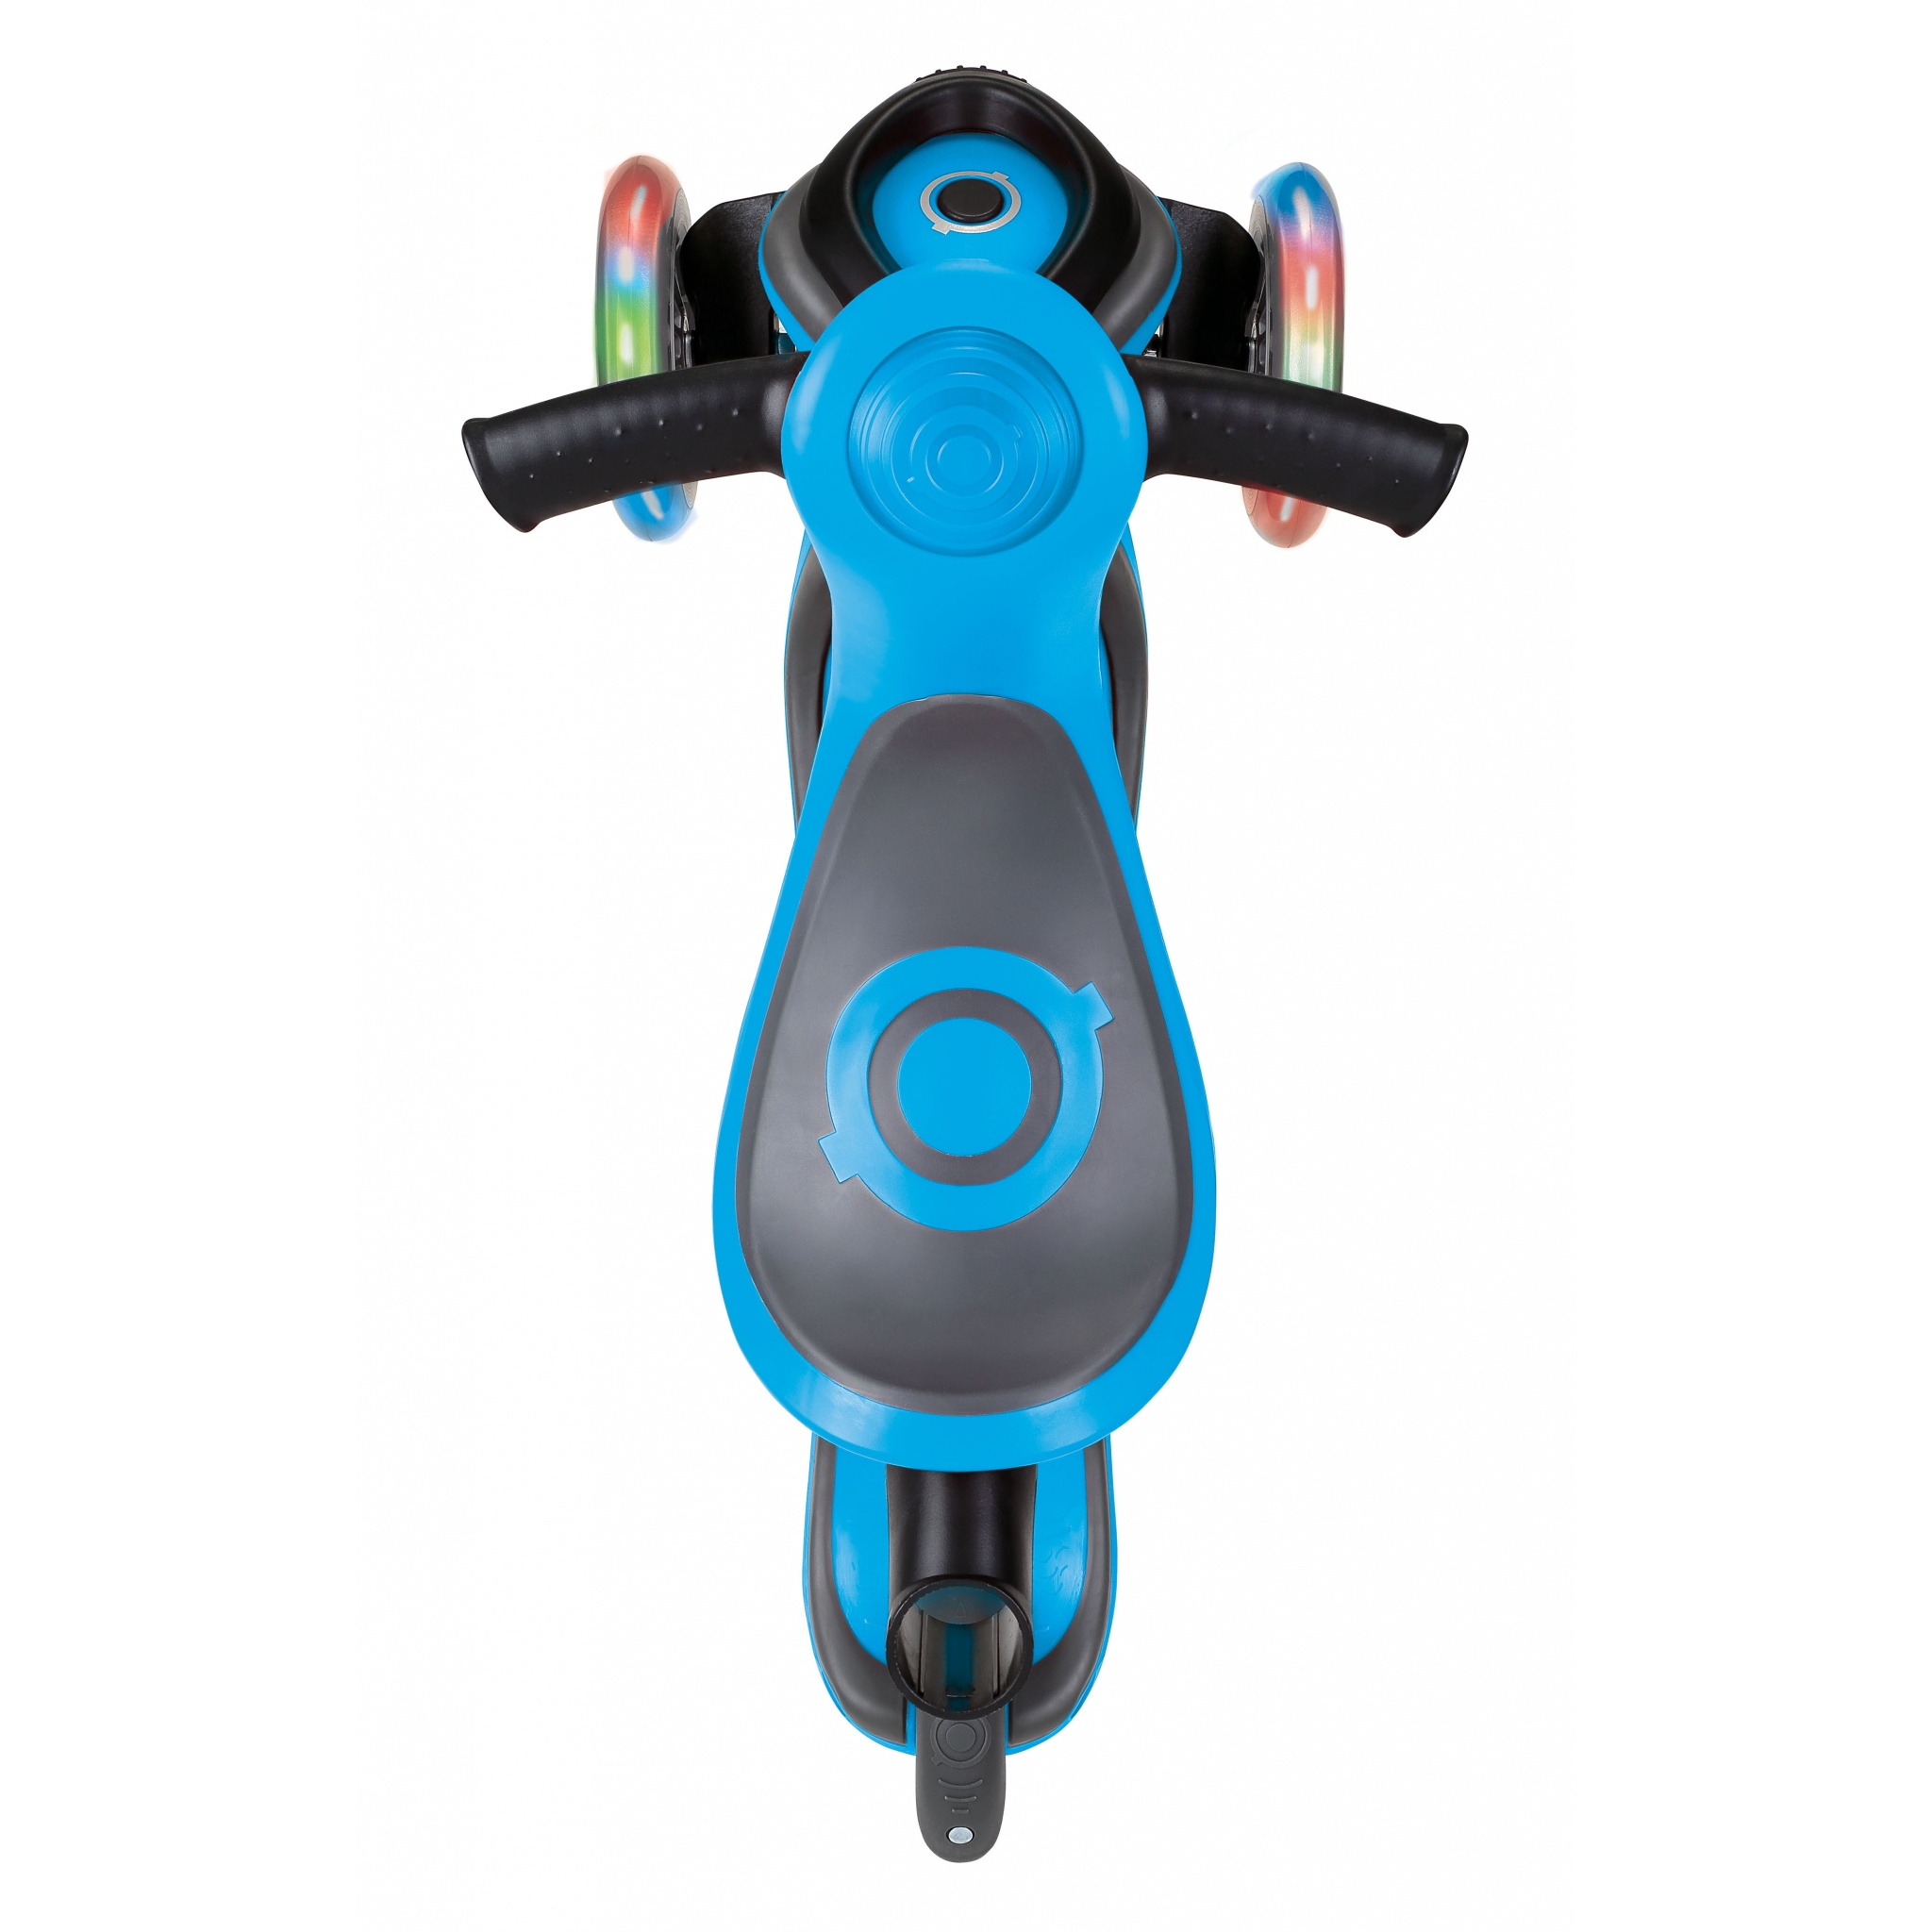 GO-UP-COMFORT-LIGHTS-scooter-with-seat-extra-wide-seat-for-maximum-comfort-sky-blue 3